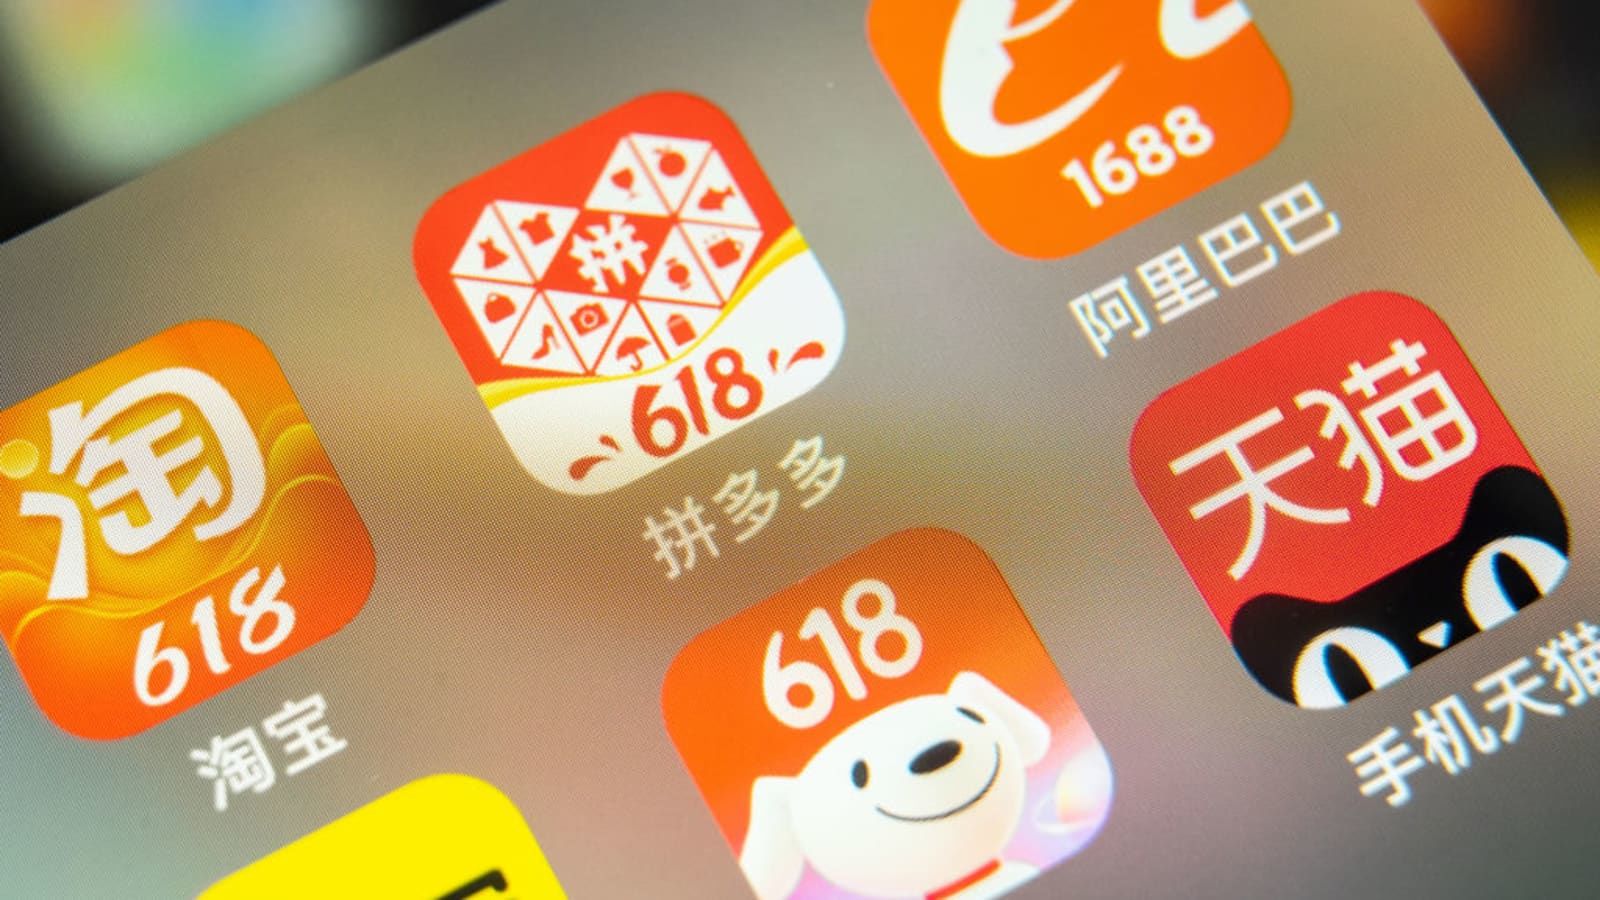 Chinese Tech Stocks Jump After Tencent Gets Deal Approval